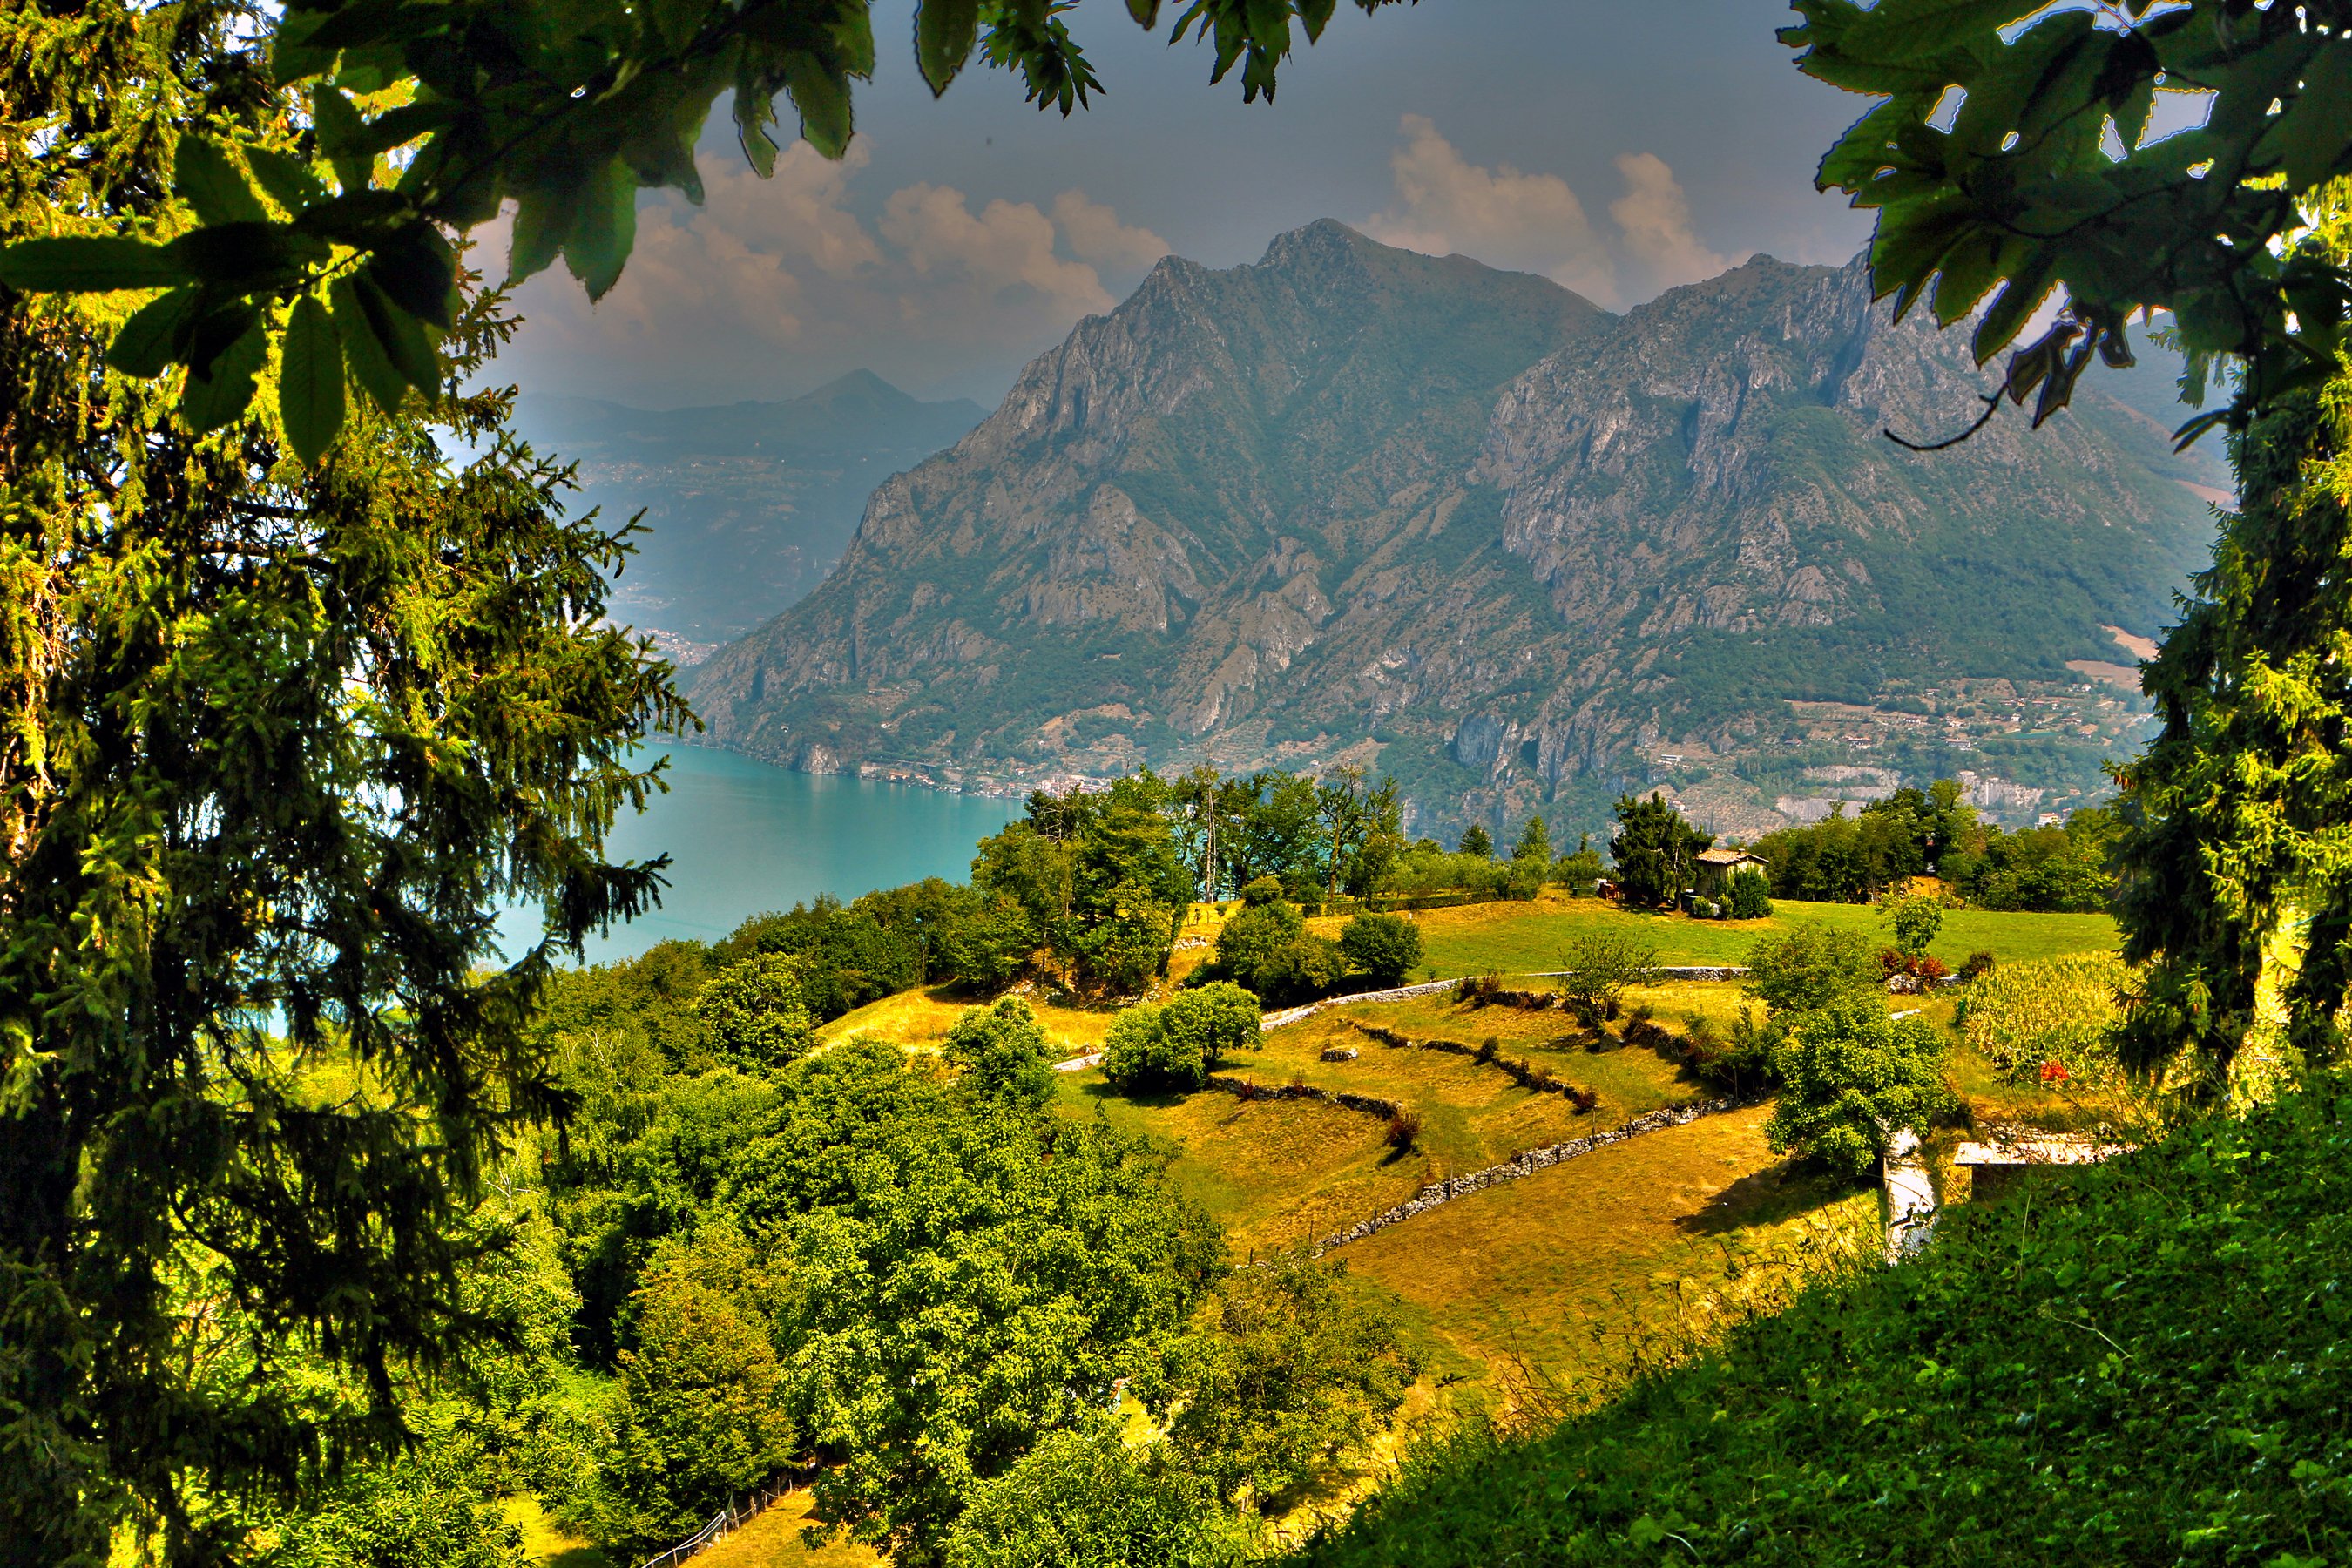 italy, Mountains, Scenery, Fields, Trees, Hdr, Monte, Isola, Lombardy, Nature Wallpaper